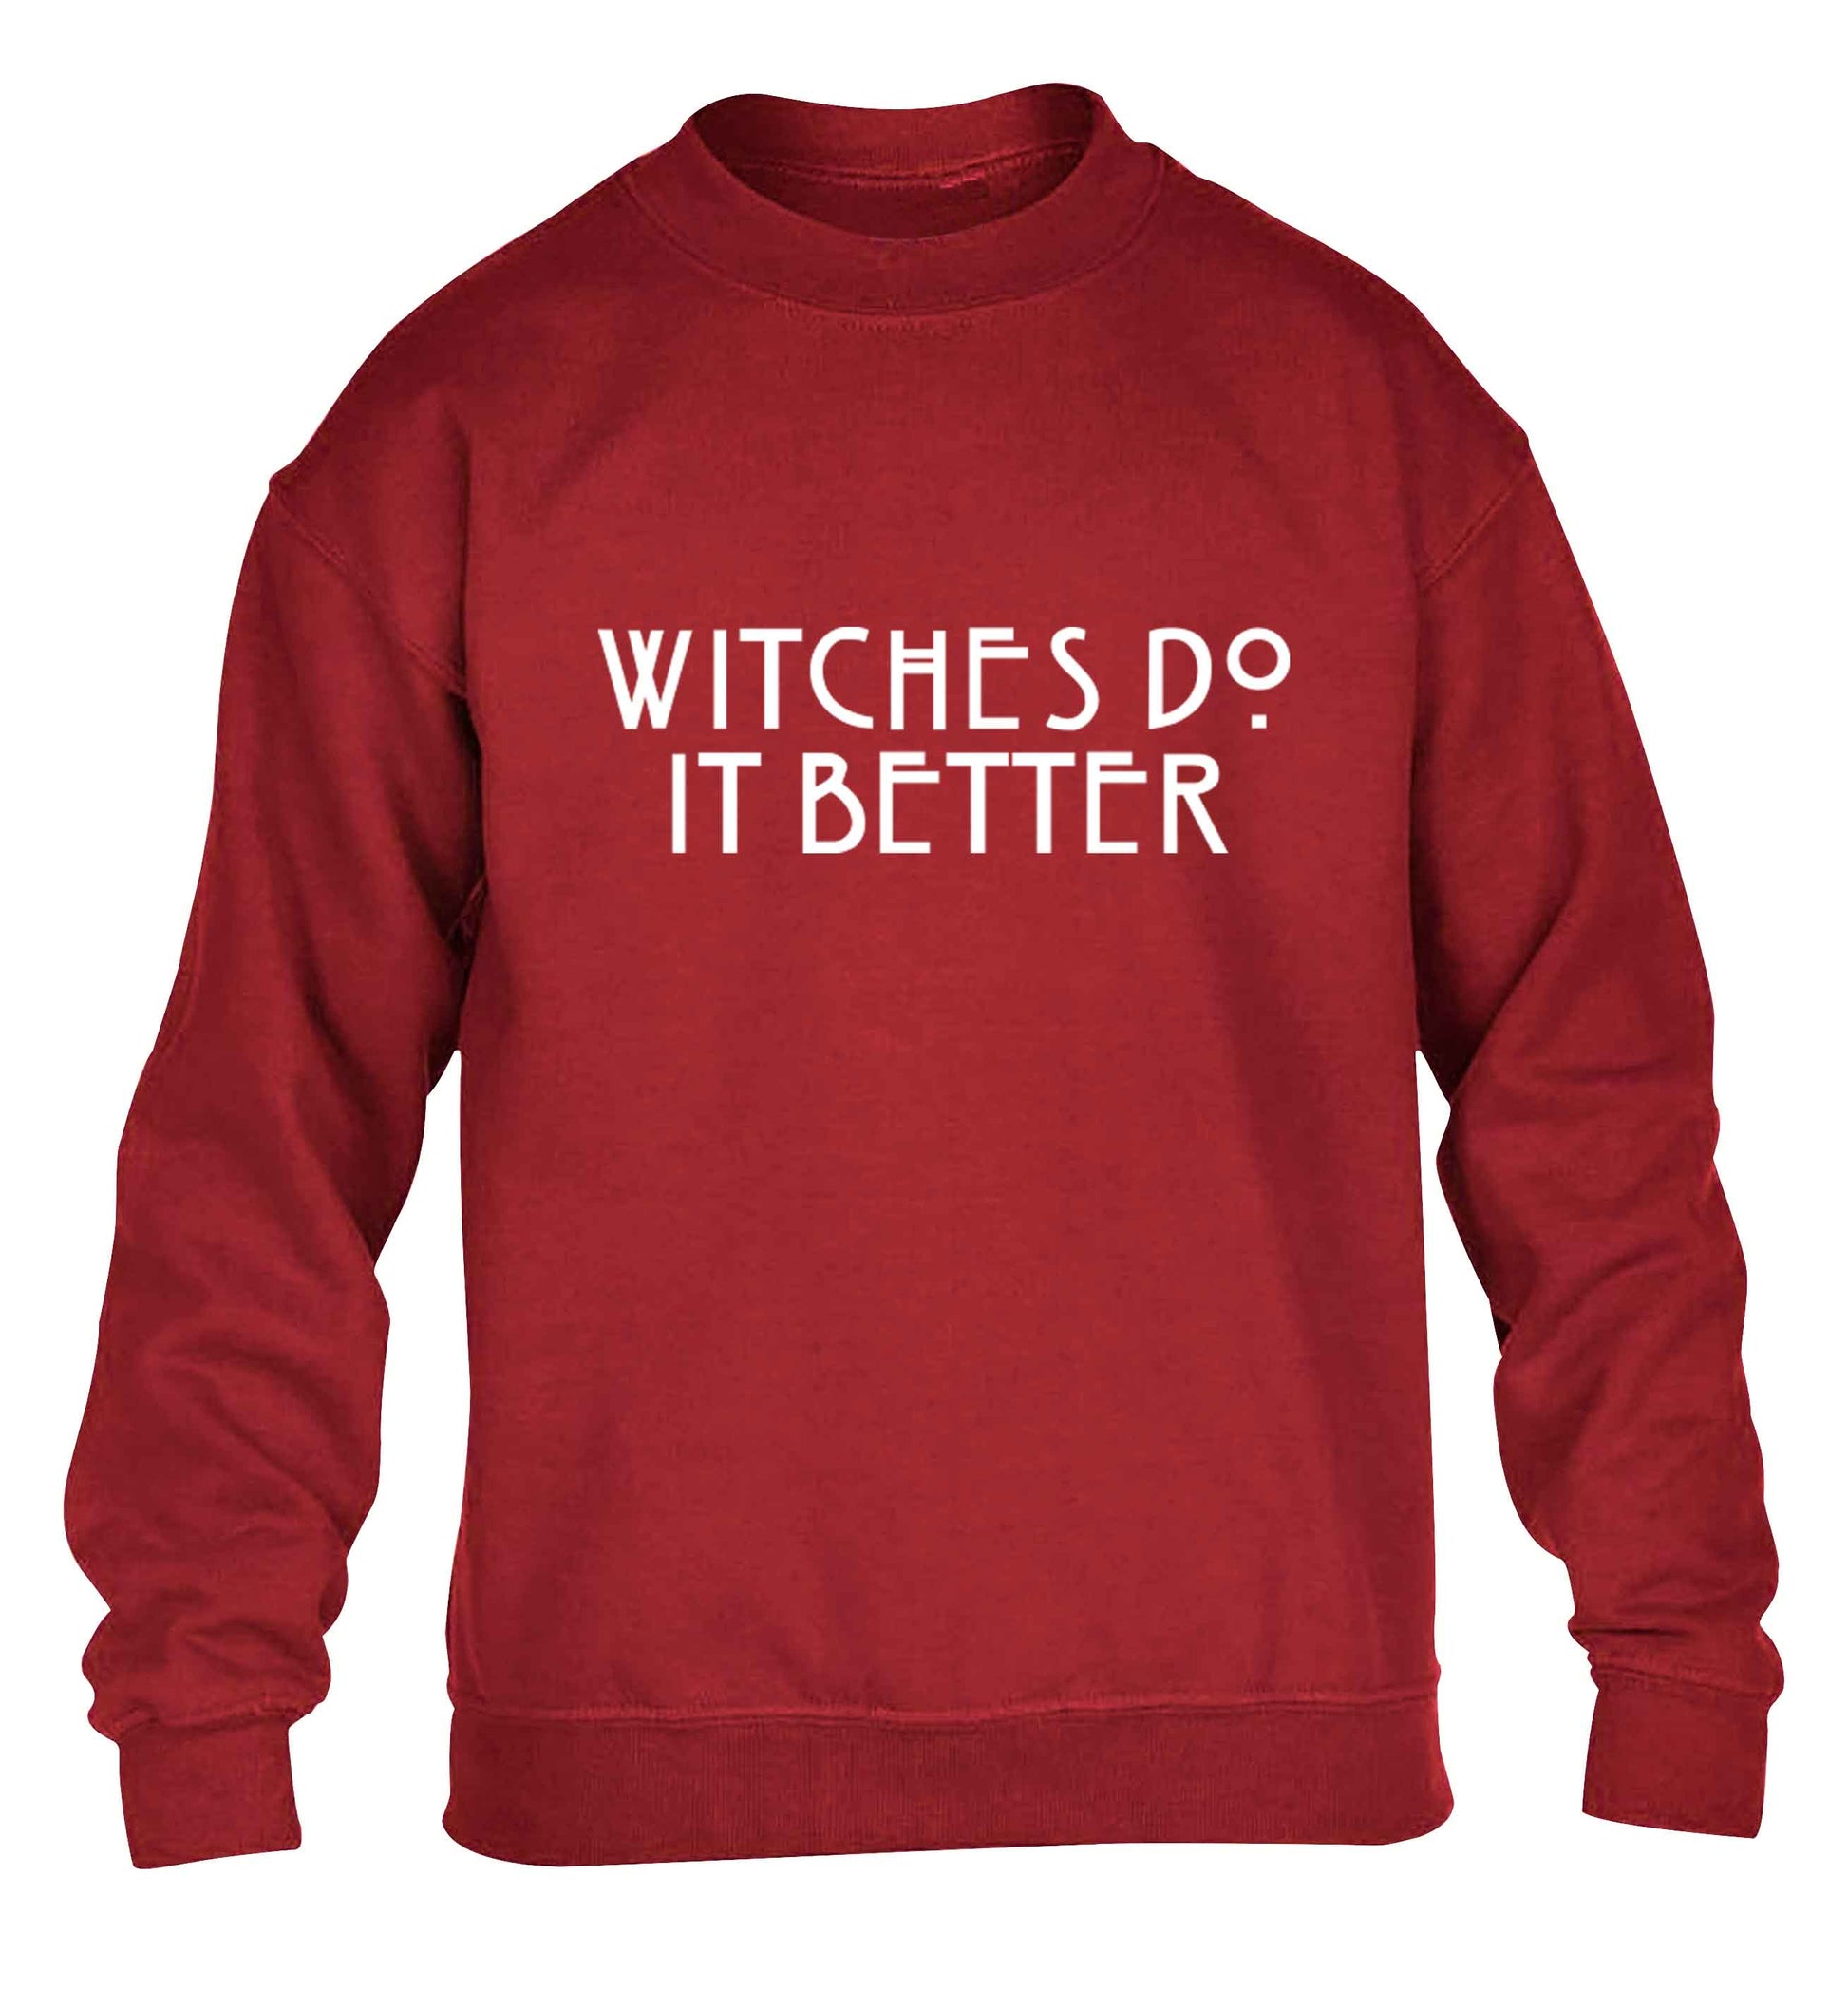 Witches do it better children's grey sweater 12-13 Years